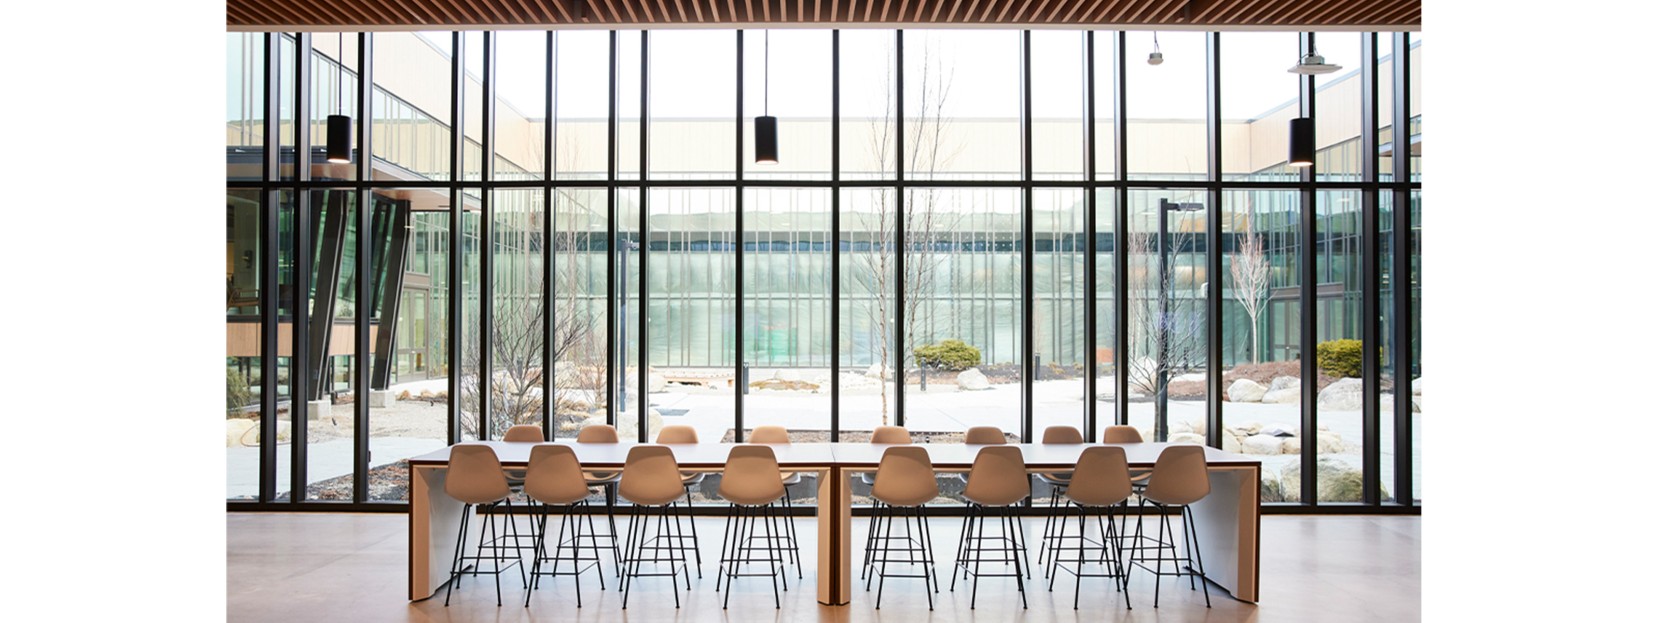 Common workspace overlooking the interior courtyard